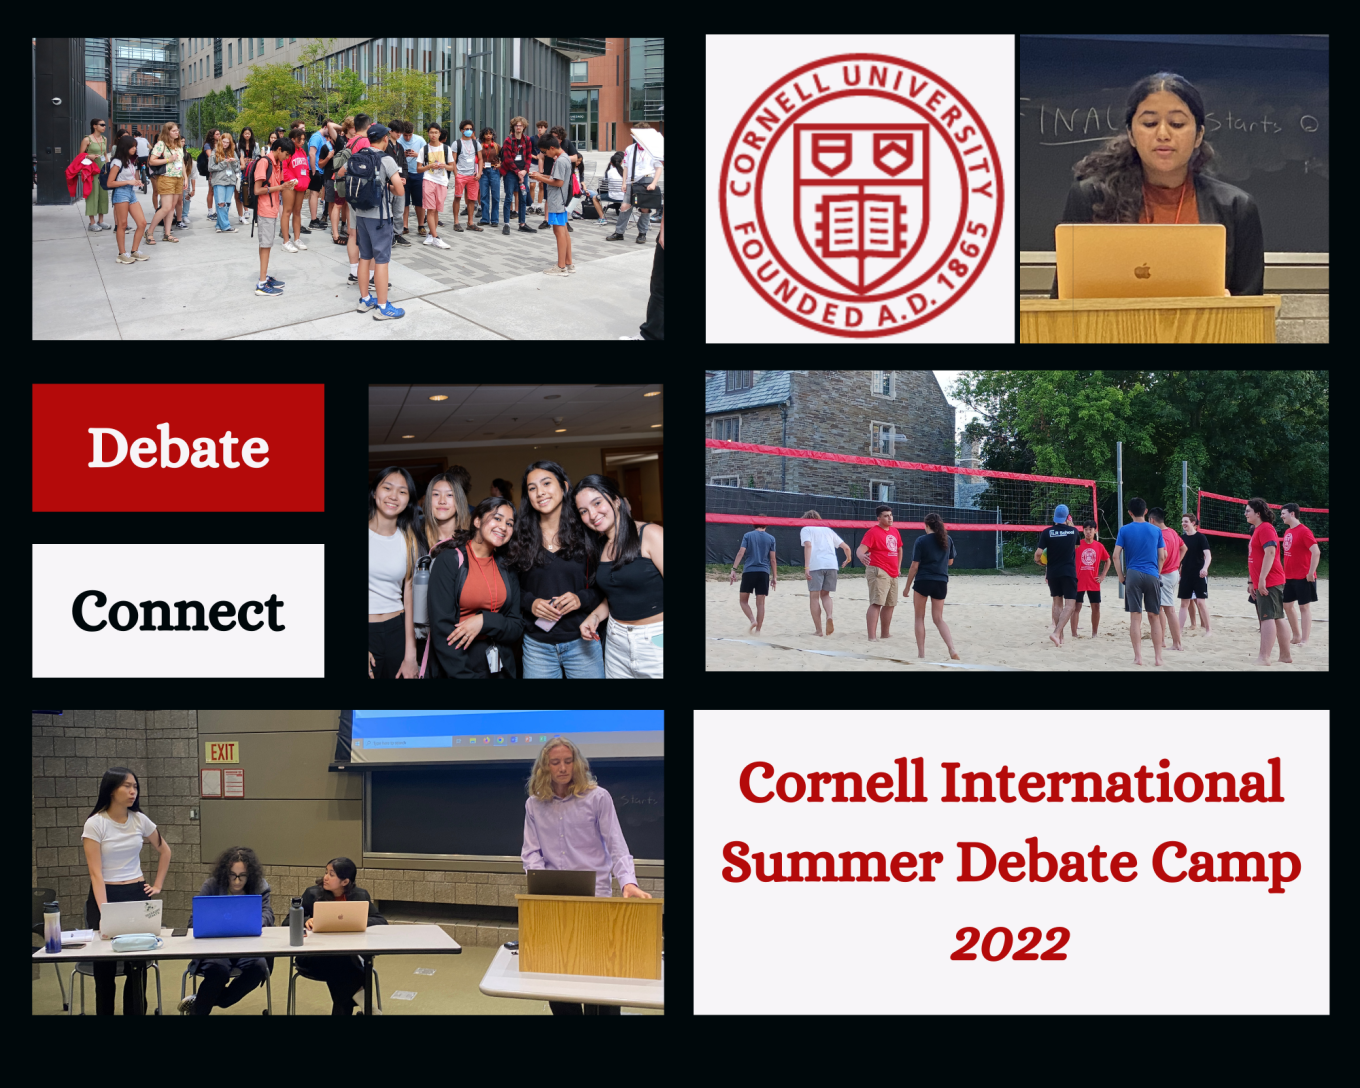 Collage showing different scenes of students at Cornell's debate camp